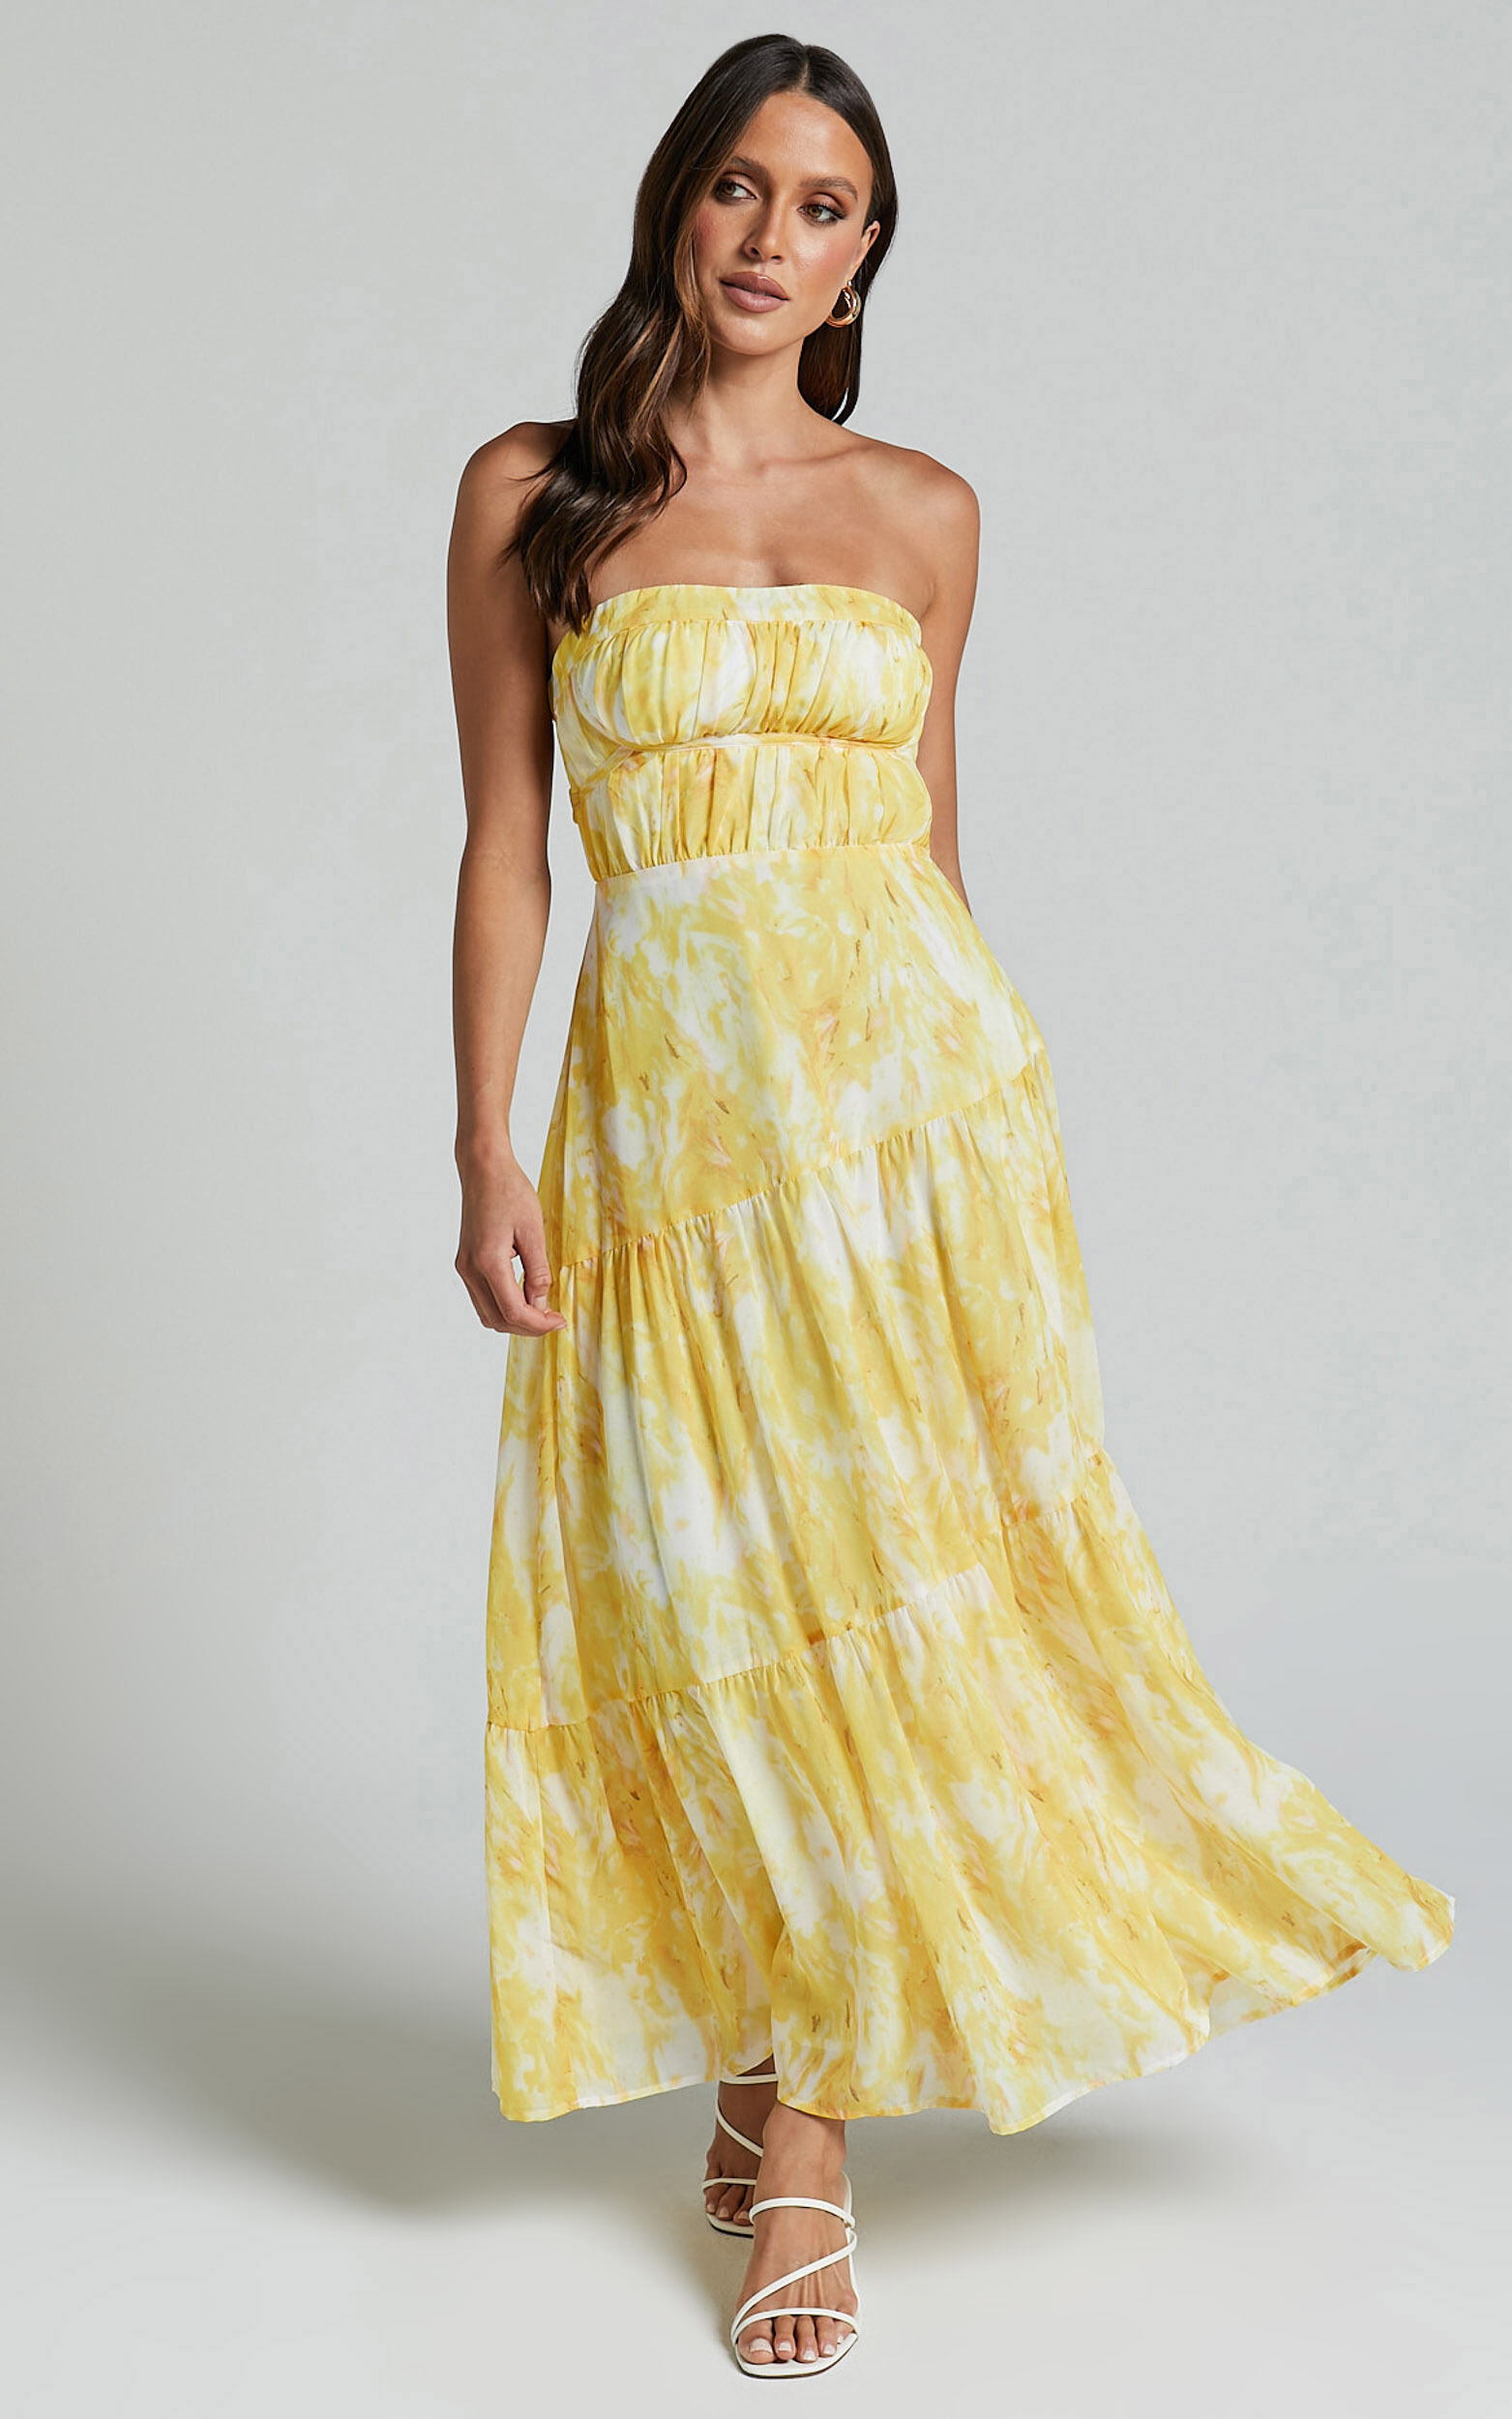 Cardelyn Midi Dress - Strapless Tiered Dress in Yellow Floral - 06, YEL1